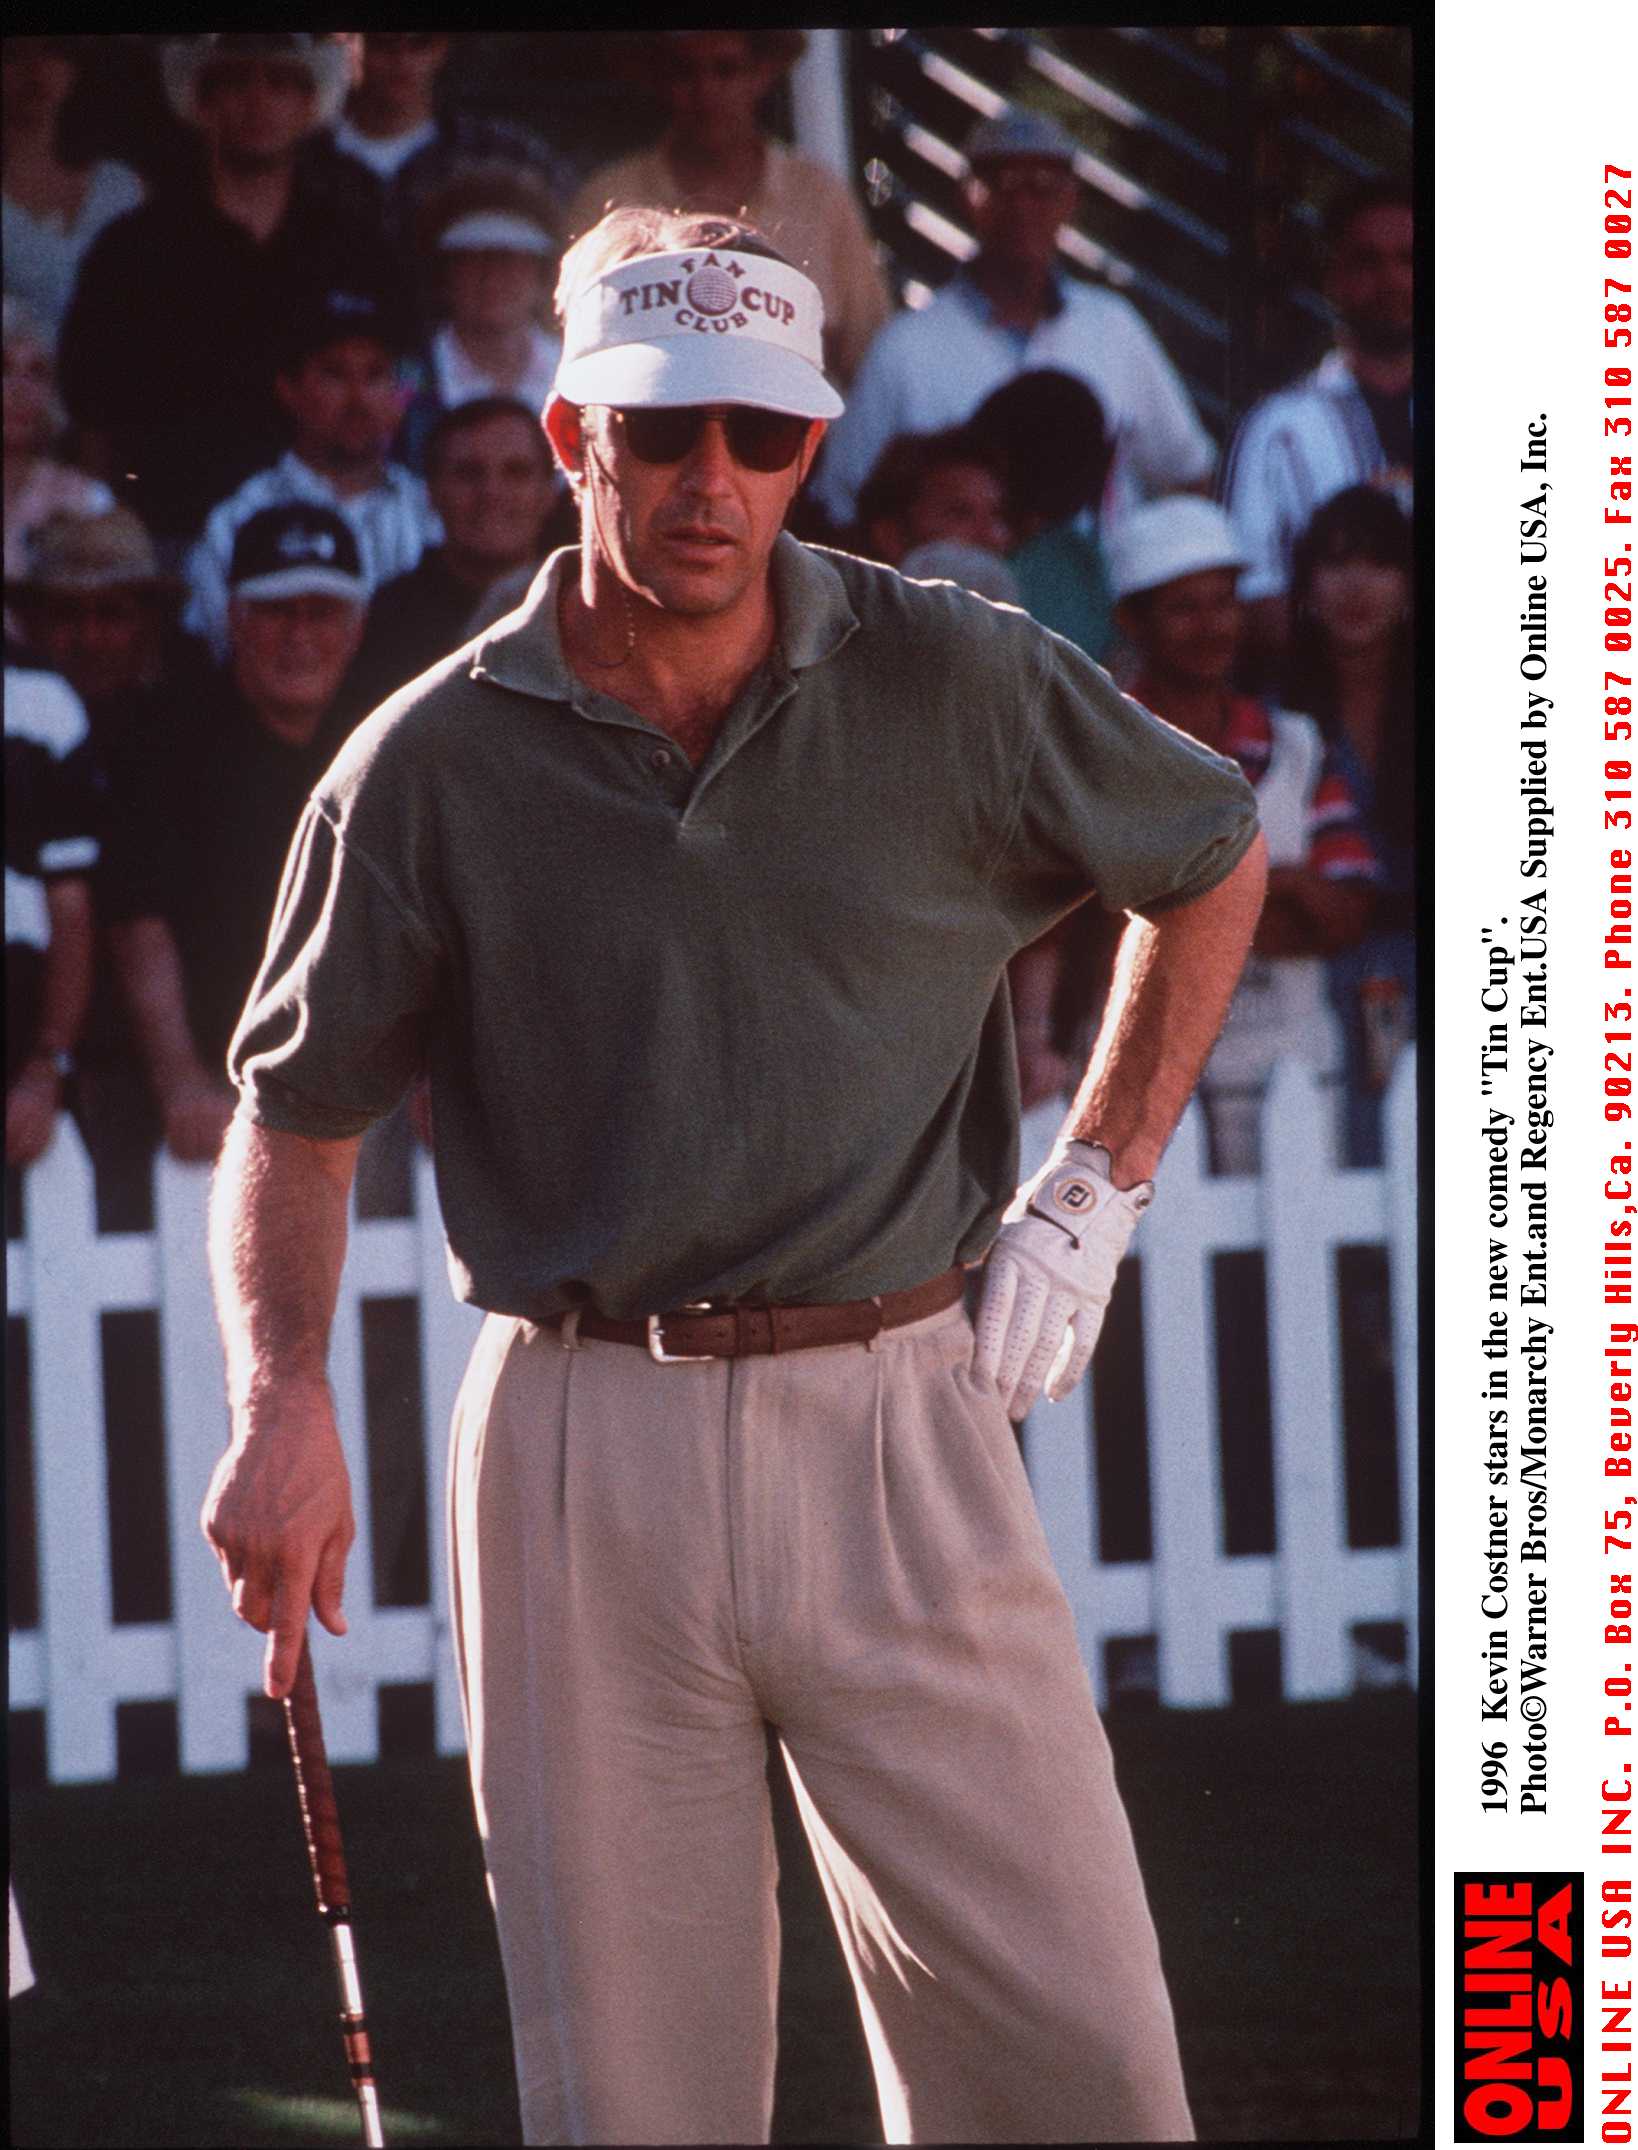 Still of Kevin Costner in Tin Cup (1996)